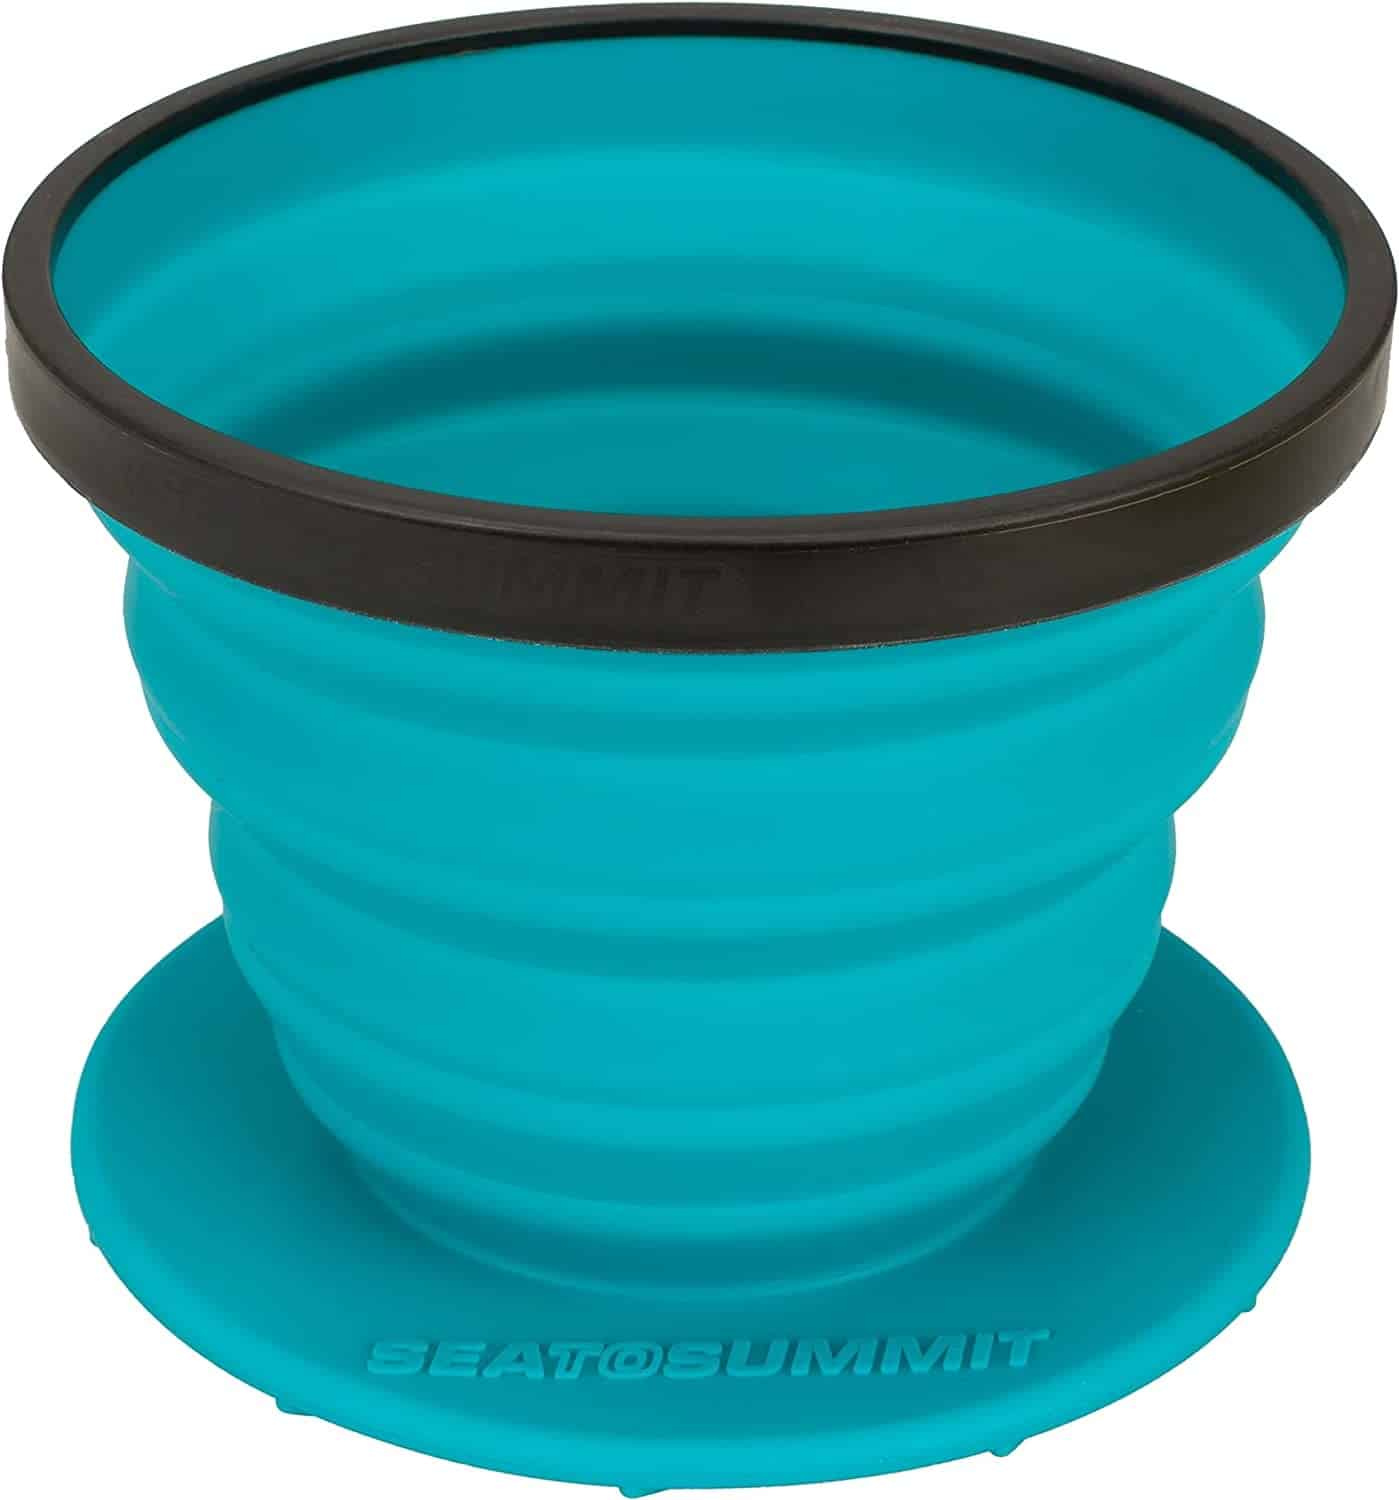 Sea to Summit X-Brew Collapsible Camping Coffee Dripper